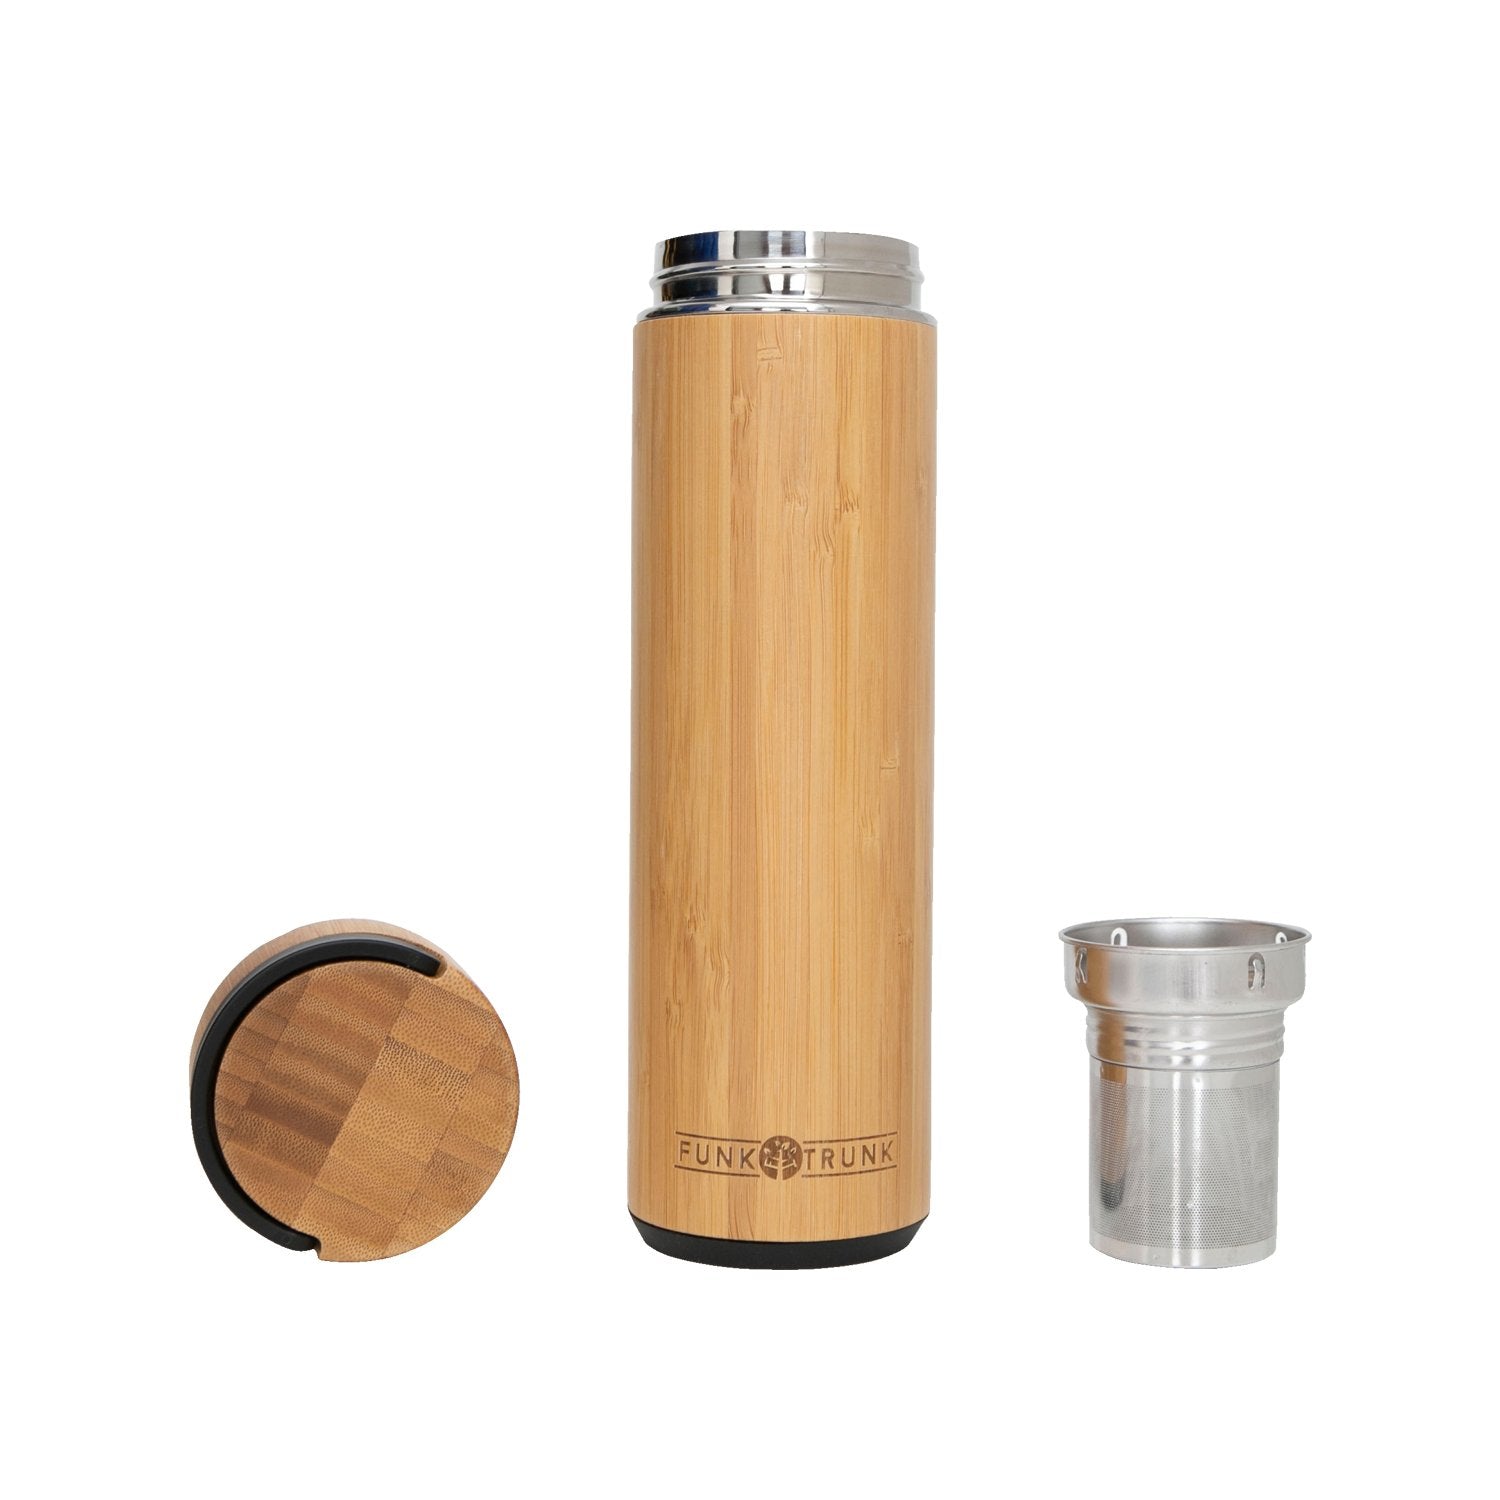 Funk Trunk new and improvised bamboo tumbler or bambler